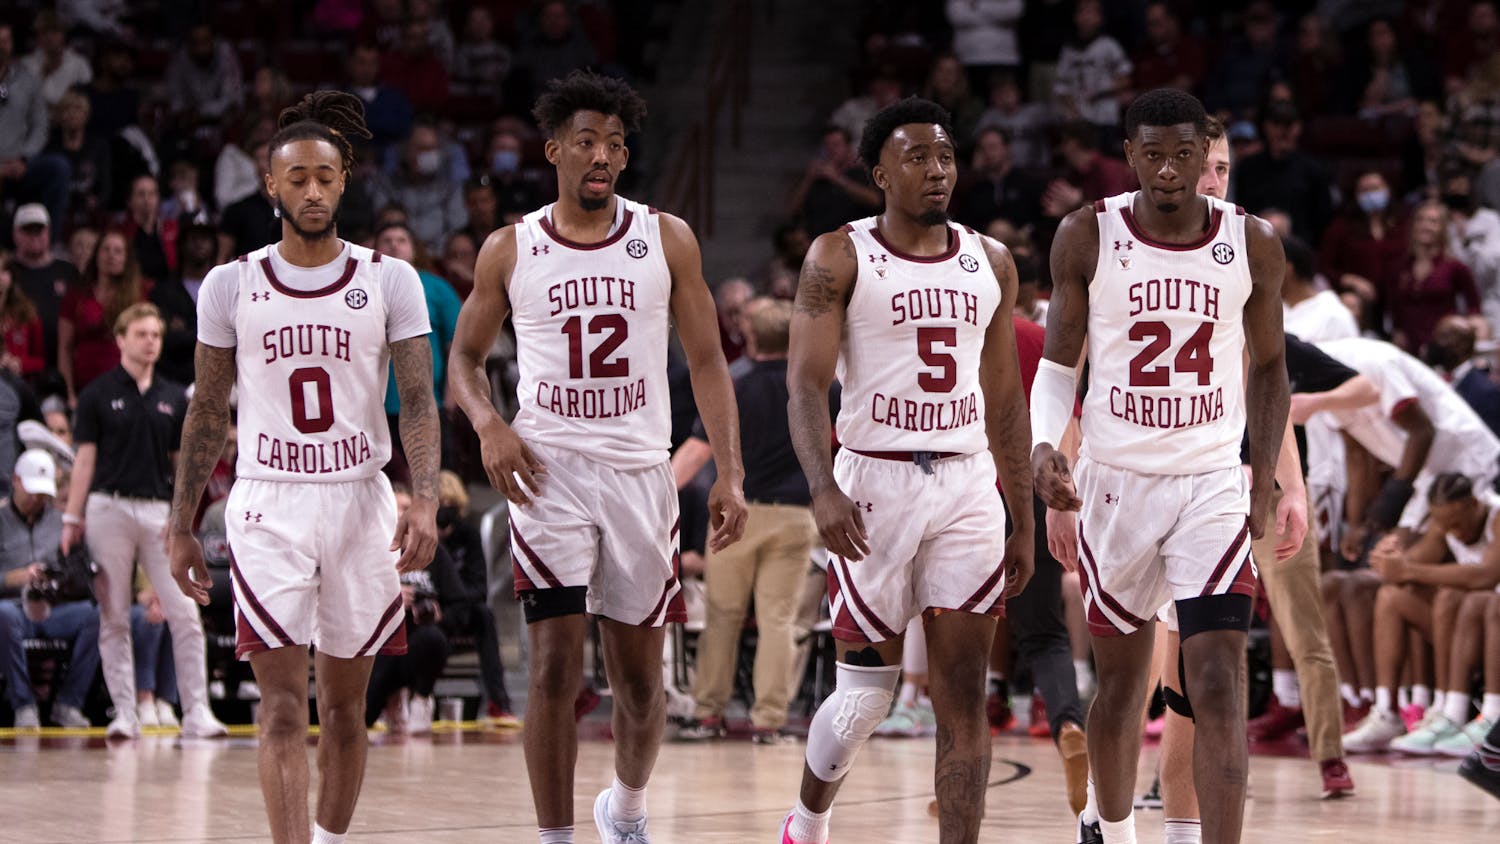 FILE— The South Carolina men’s basketball team walking up the court at Colonial Life Area in Columbia, SC during their game versus Louisiana State University on Feb. 19, 2022. The Gamecocks beat the Tigers 77-75.